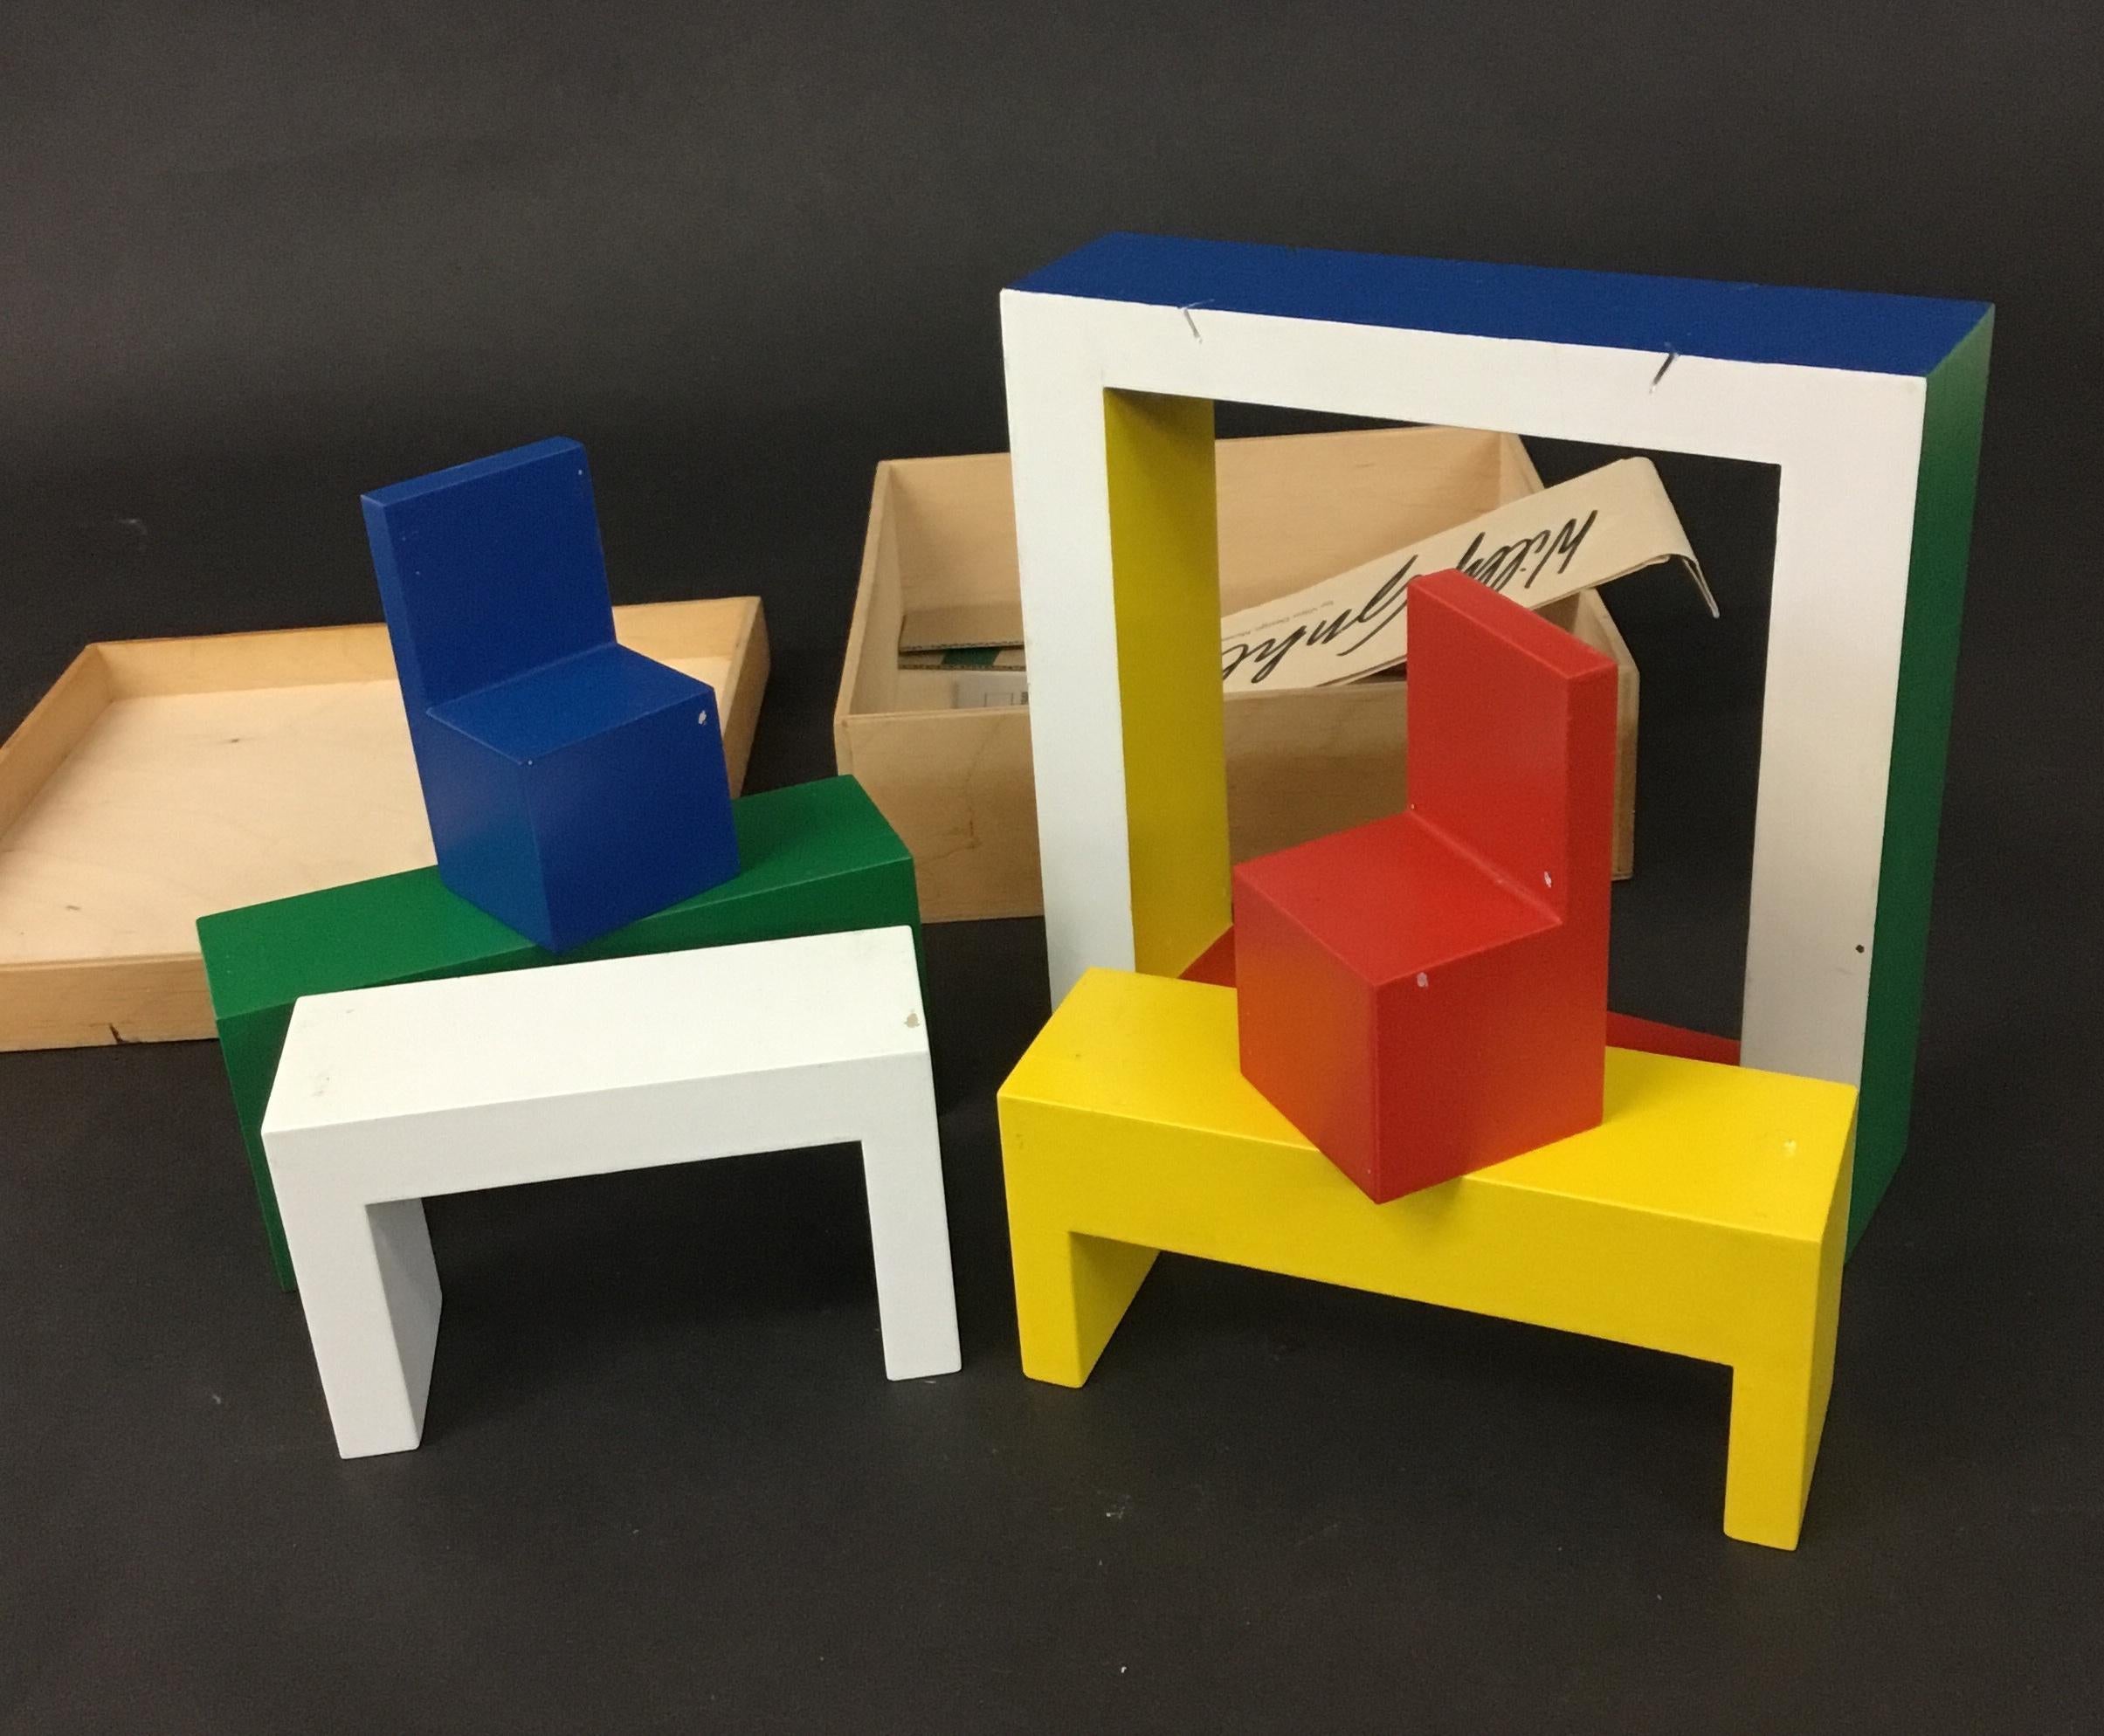 A toy designed by Willy Guhl in 1948, and re-released by Vitra Design Museum in 2000. A play furniture set and a puzzle in one. Complete with wooden box and paperwork.